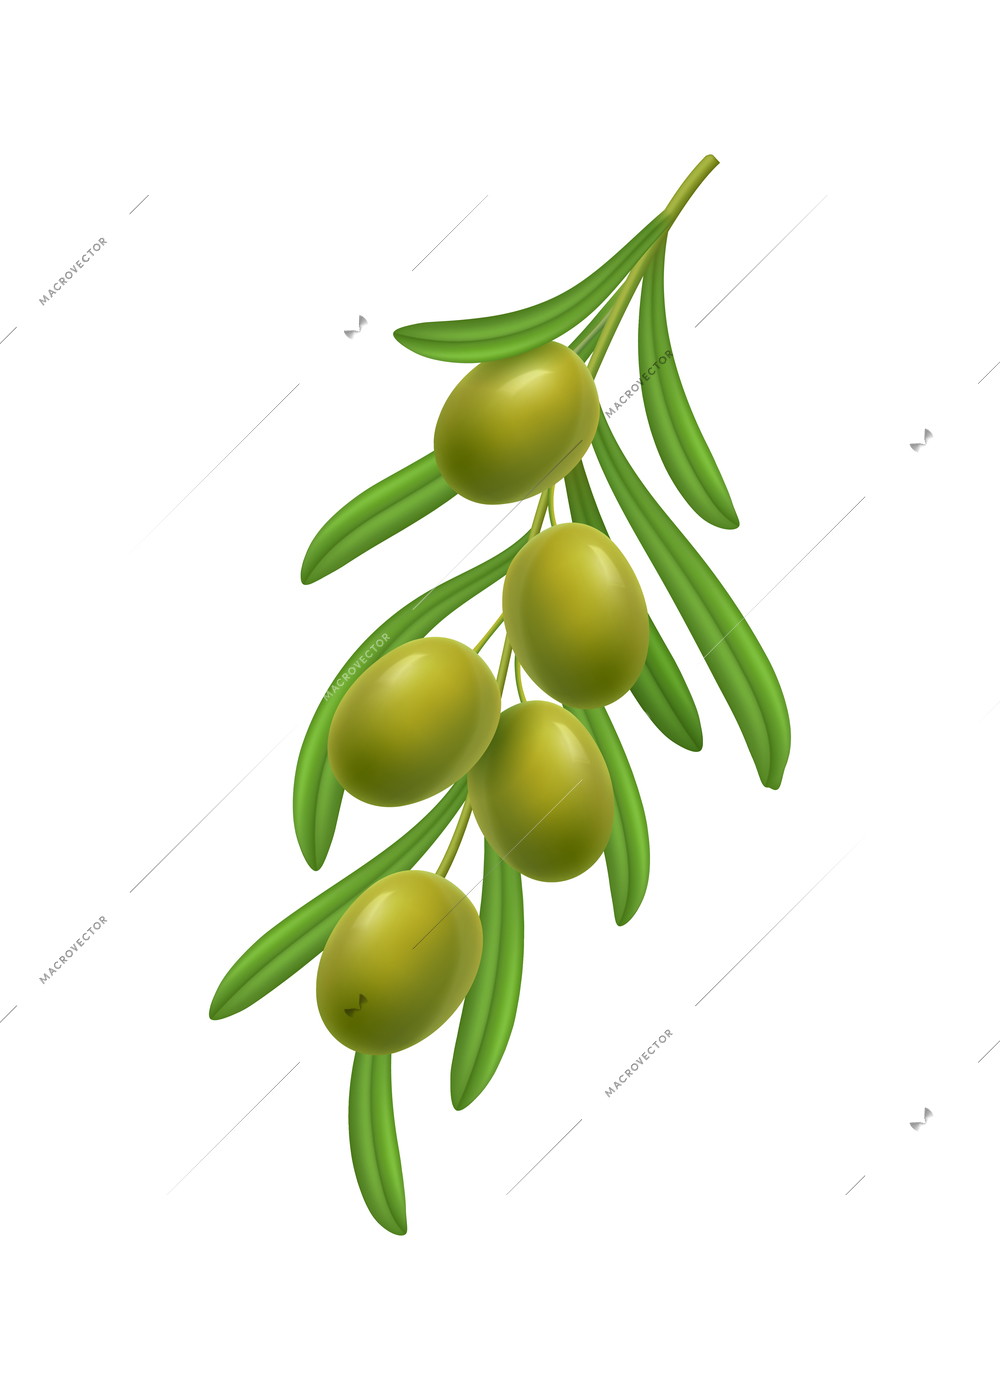 Realistic branch with green olives and leaves on white background vector illustration